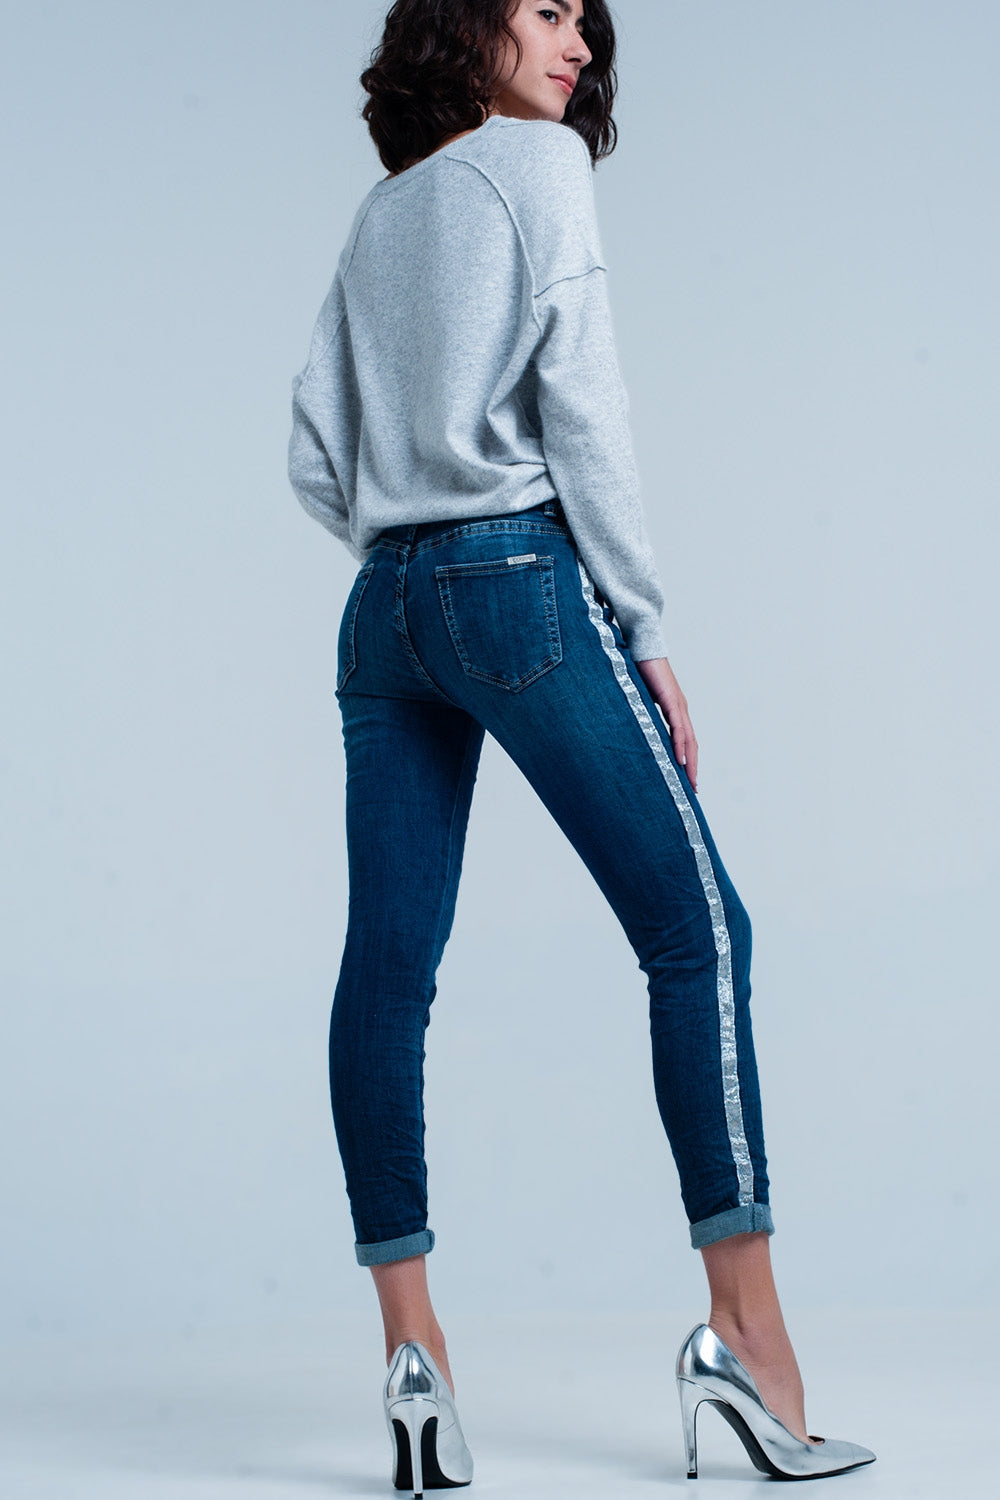 Dark Wash Jeans with Silver Shiny Side StripeJeans